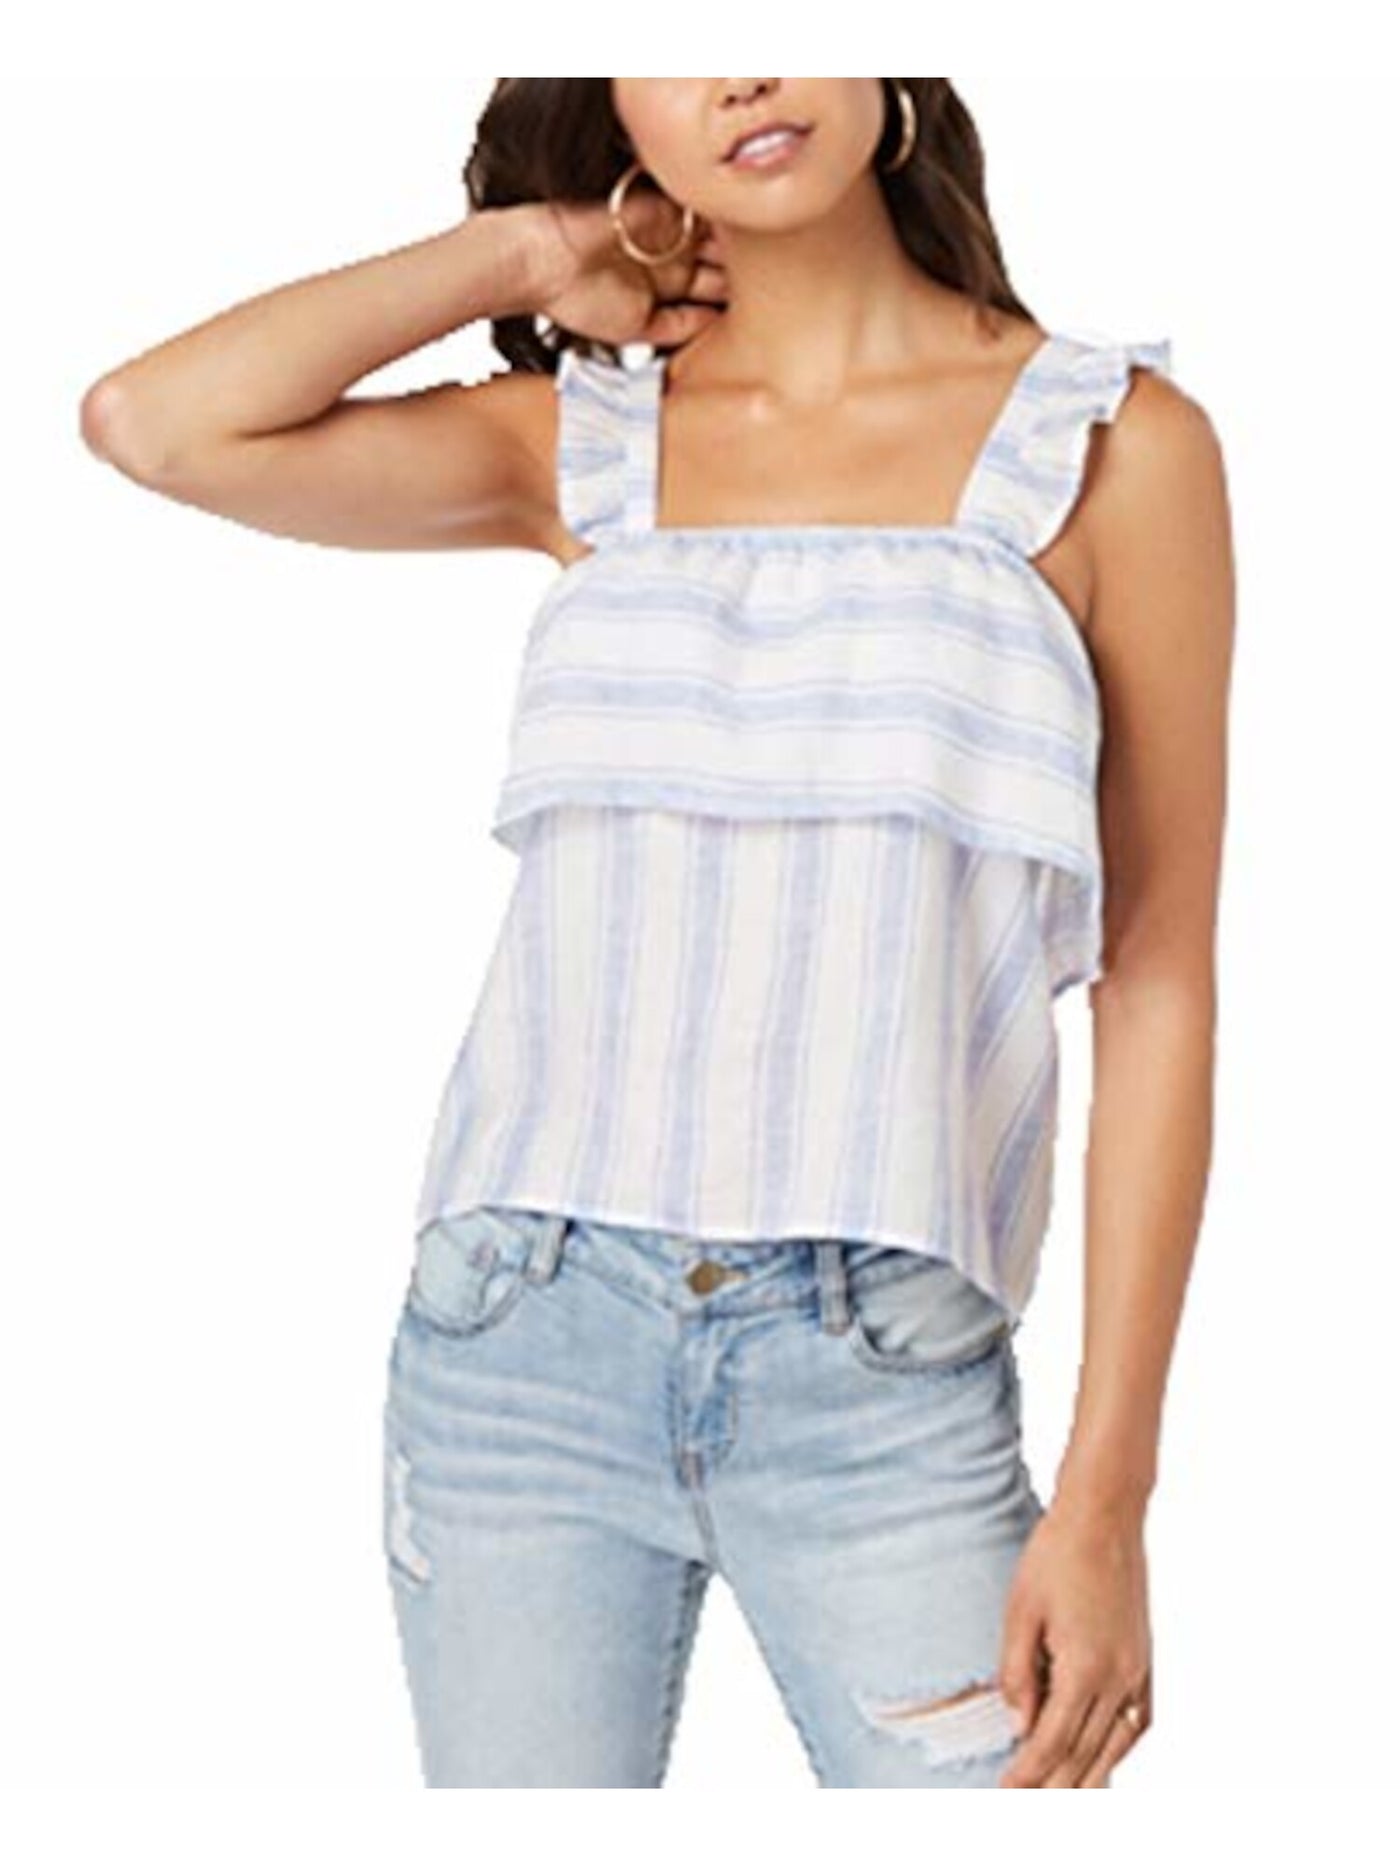 CRAVE FAME Womens White Stretch Ruffled Elastic Popover Striped Sleeveless Square Neck Tank Top Juniors XS